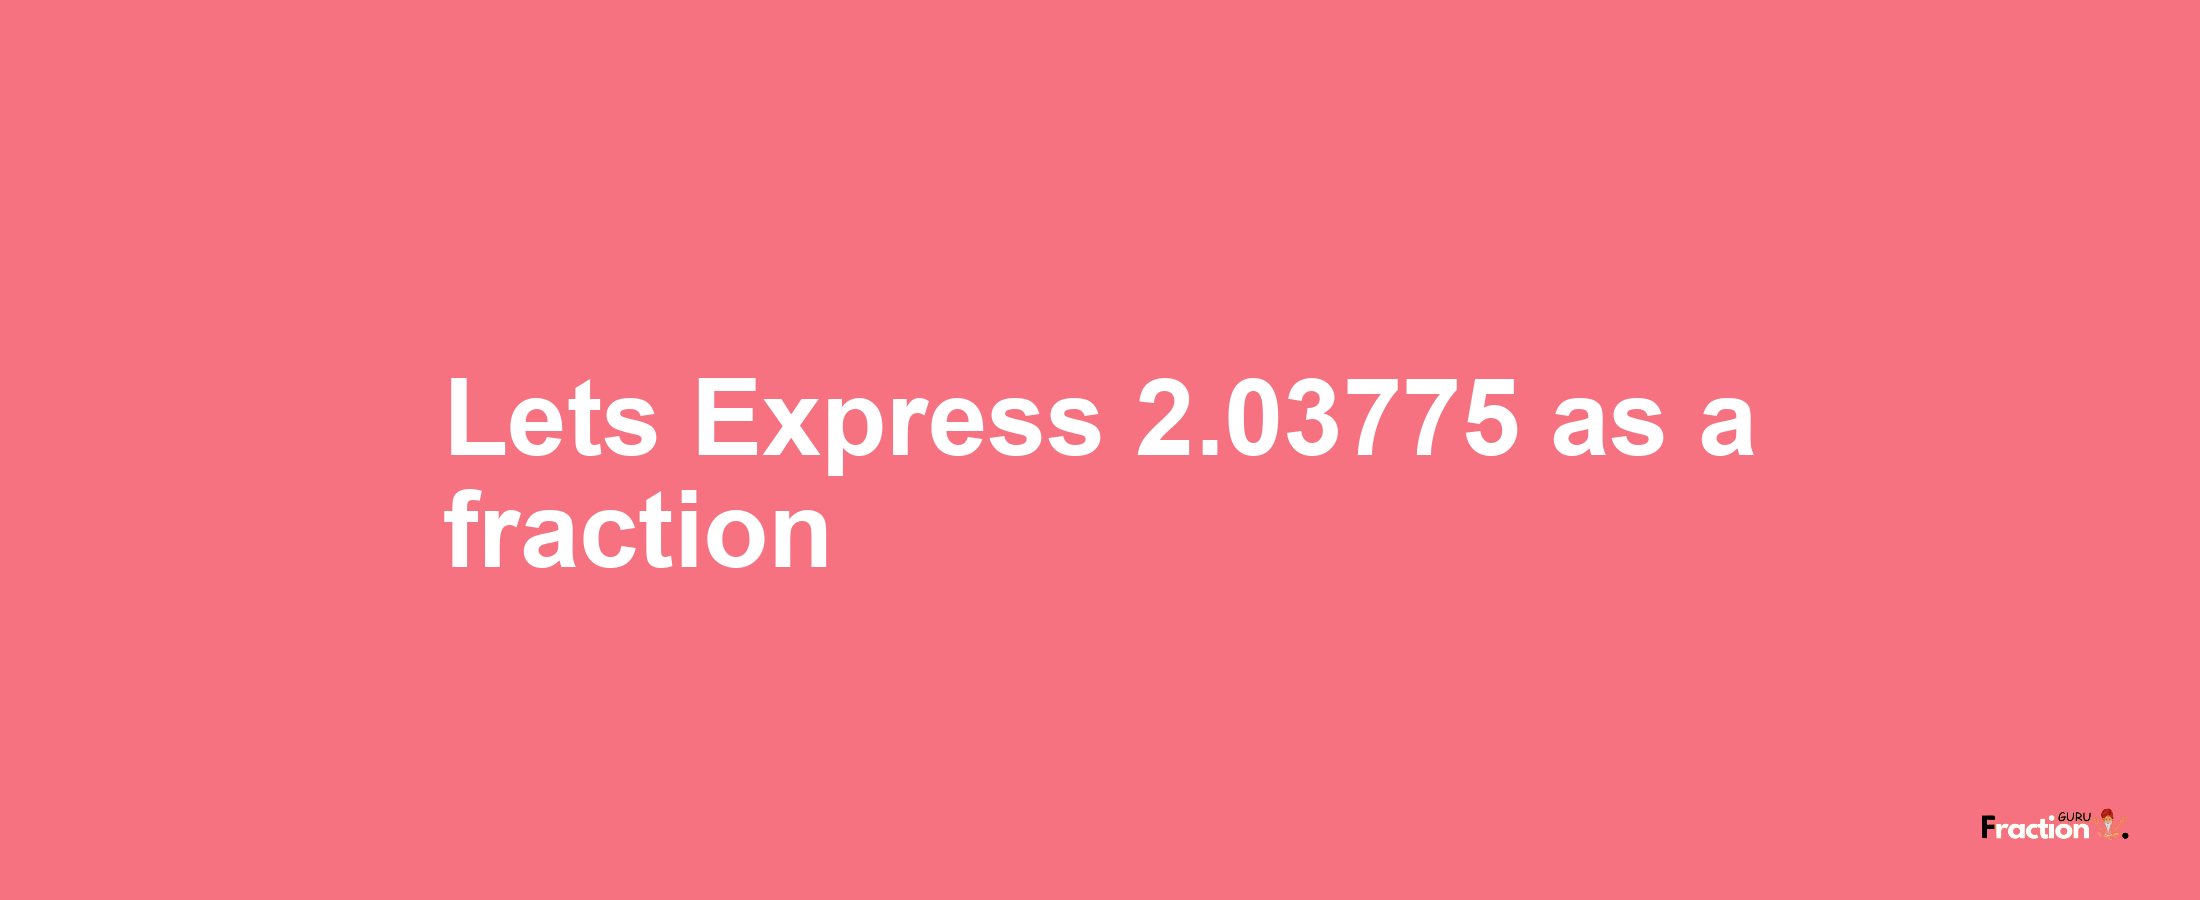 Lets Express 2.03775 as afraction